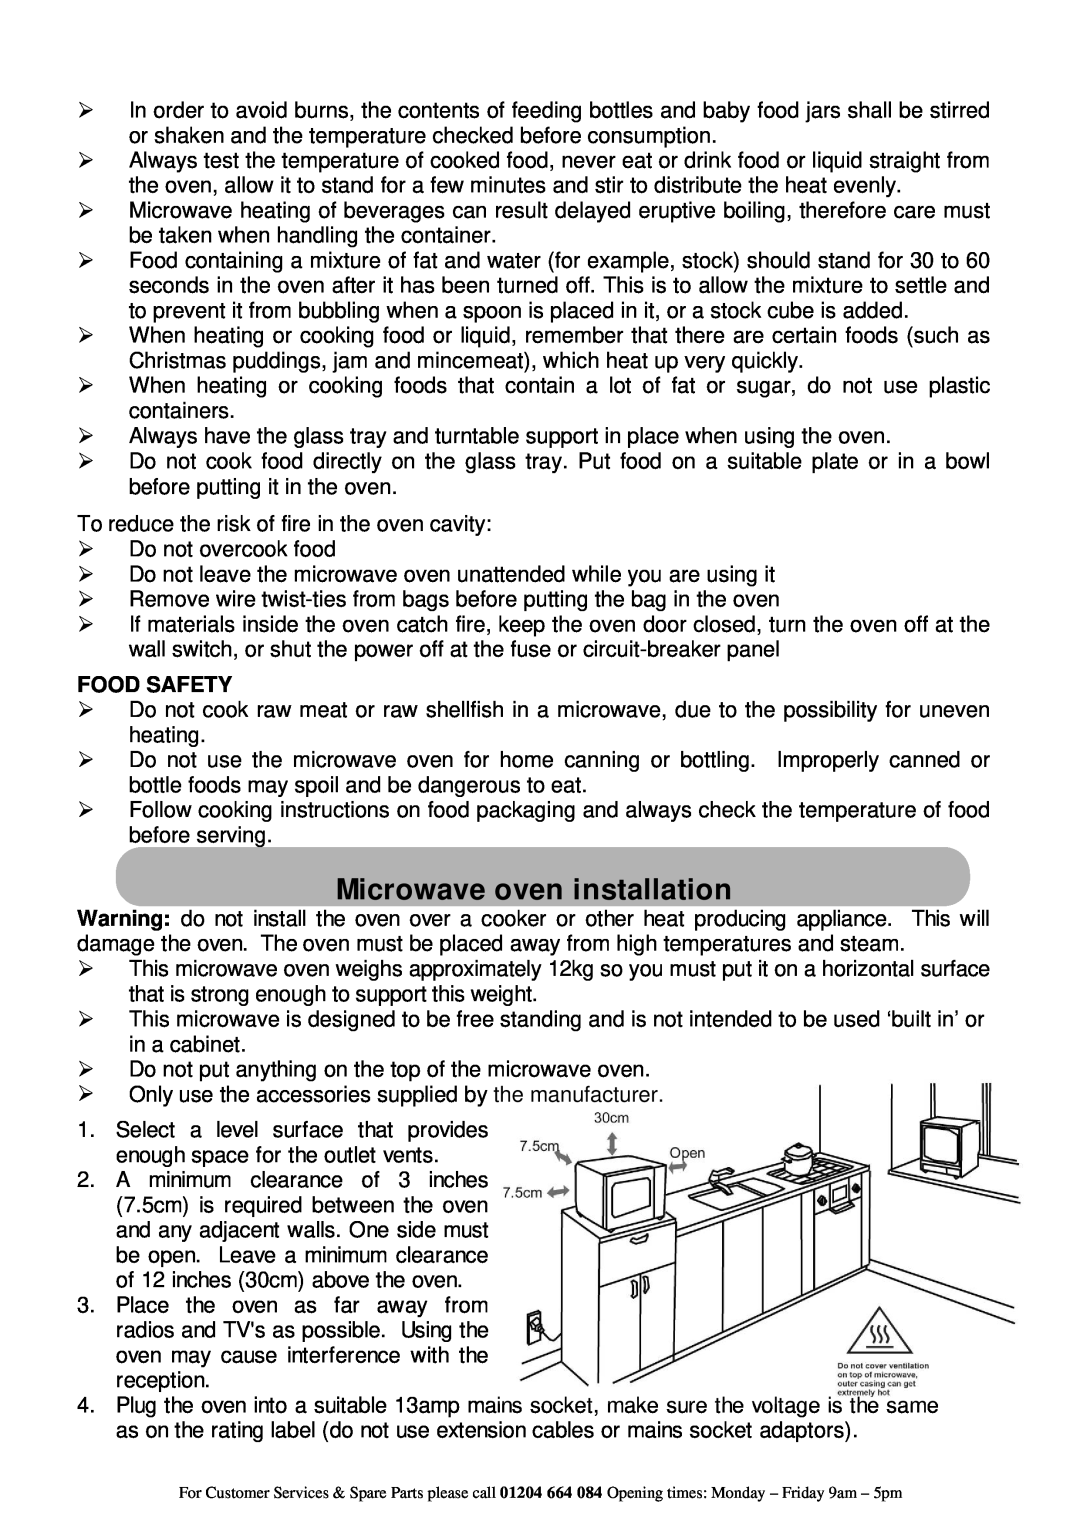 Russell Hobbs RHM2506 instruction manual Microwave oven installation, Food Safety 